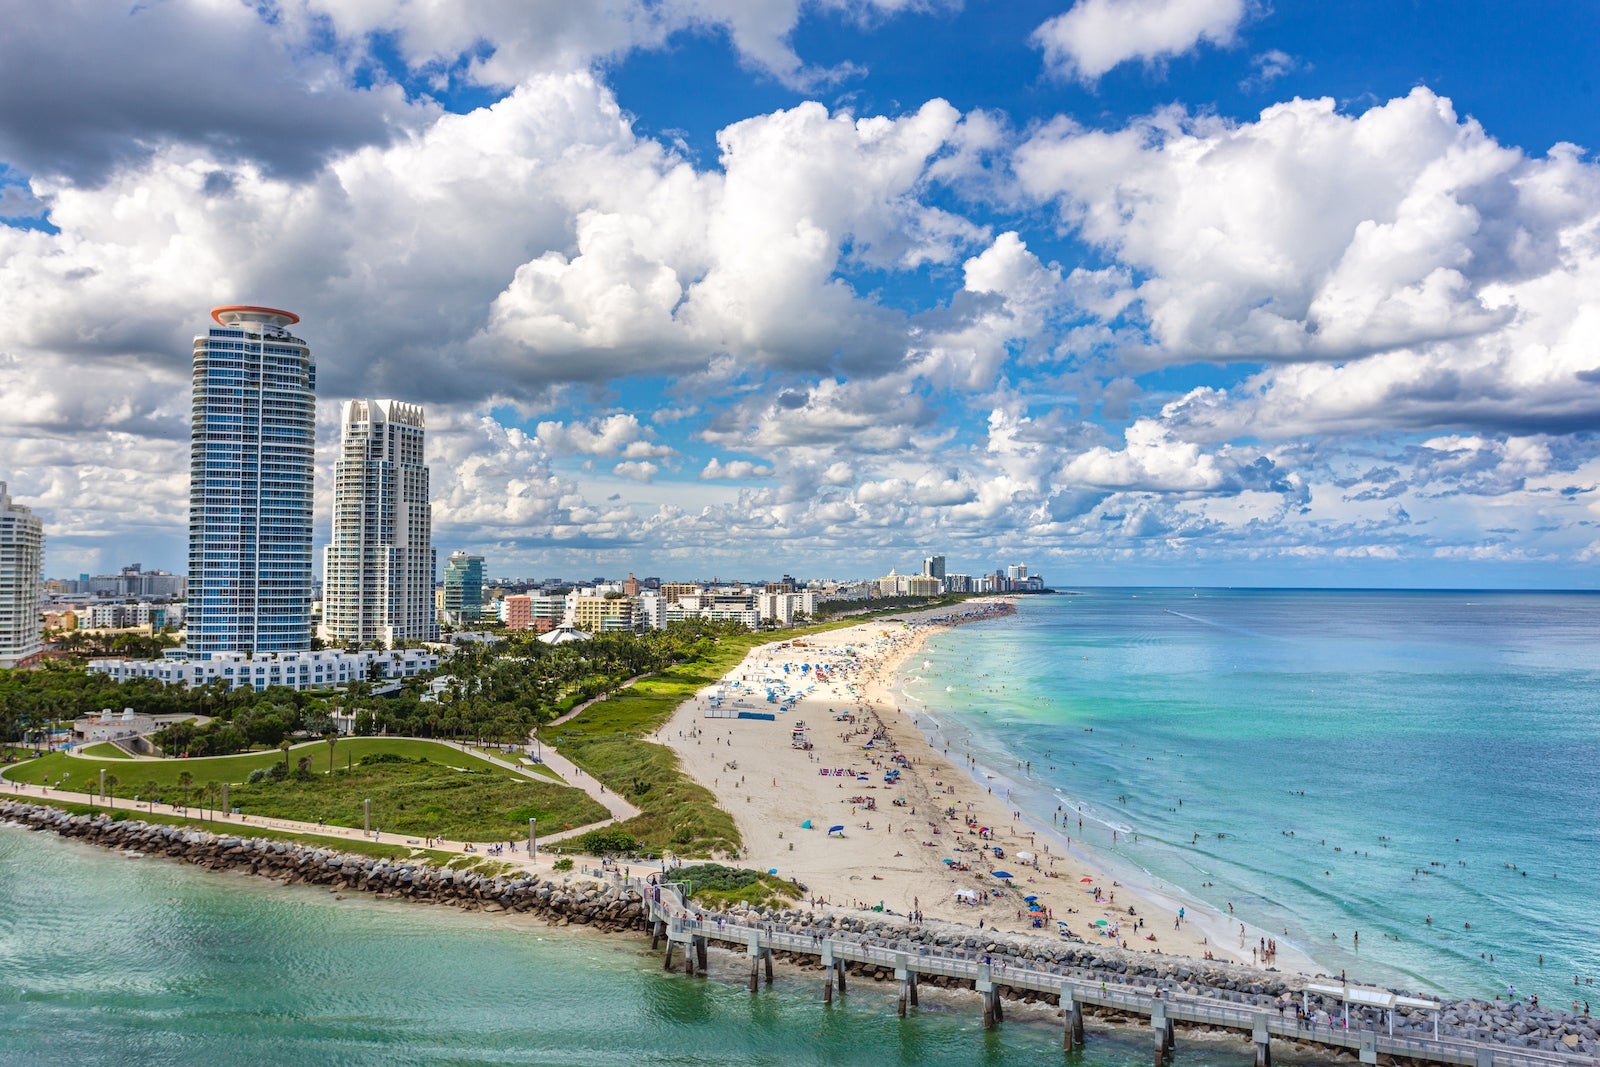 High view of South Beach in Miami from South Pointe Park, Florida, USA